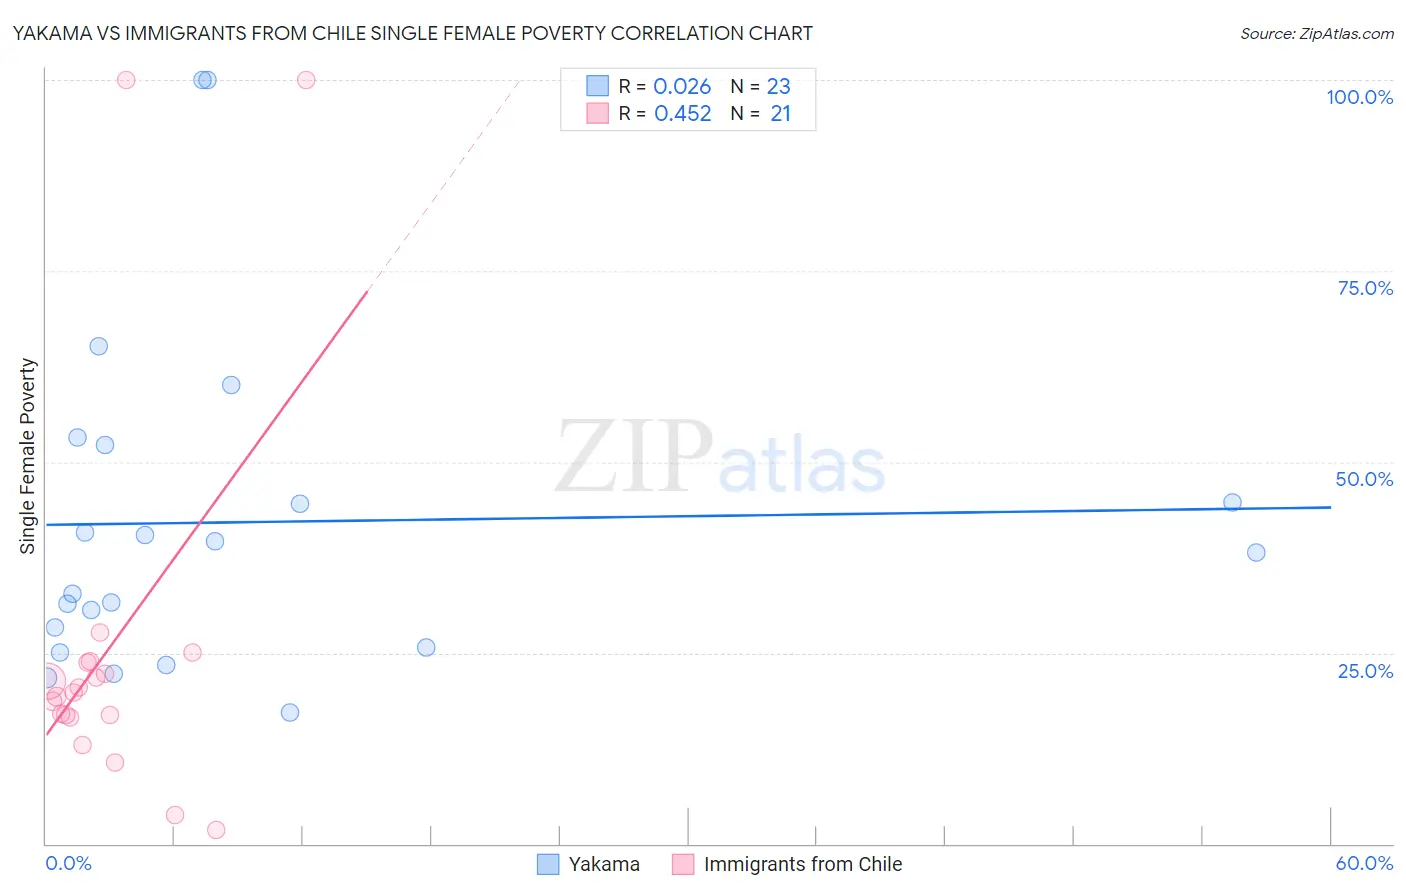 Yakama vs Immigrants from Chile Single Female Poverty